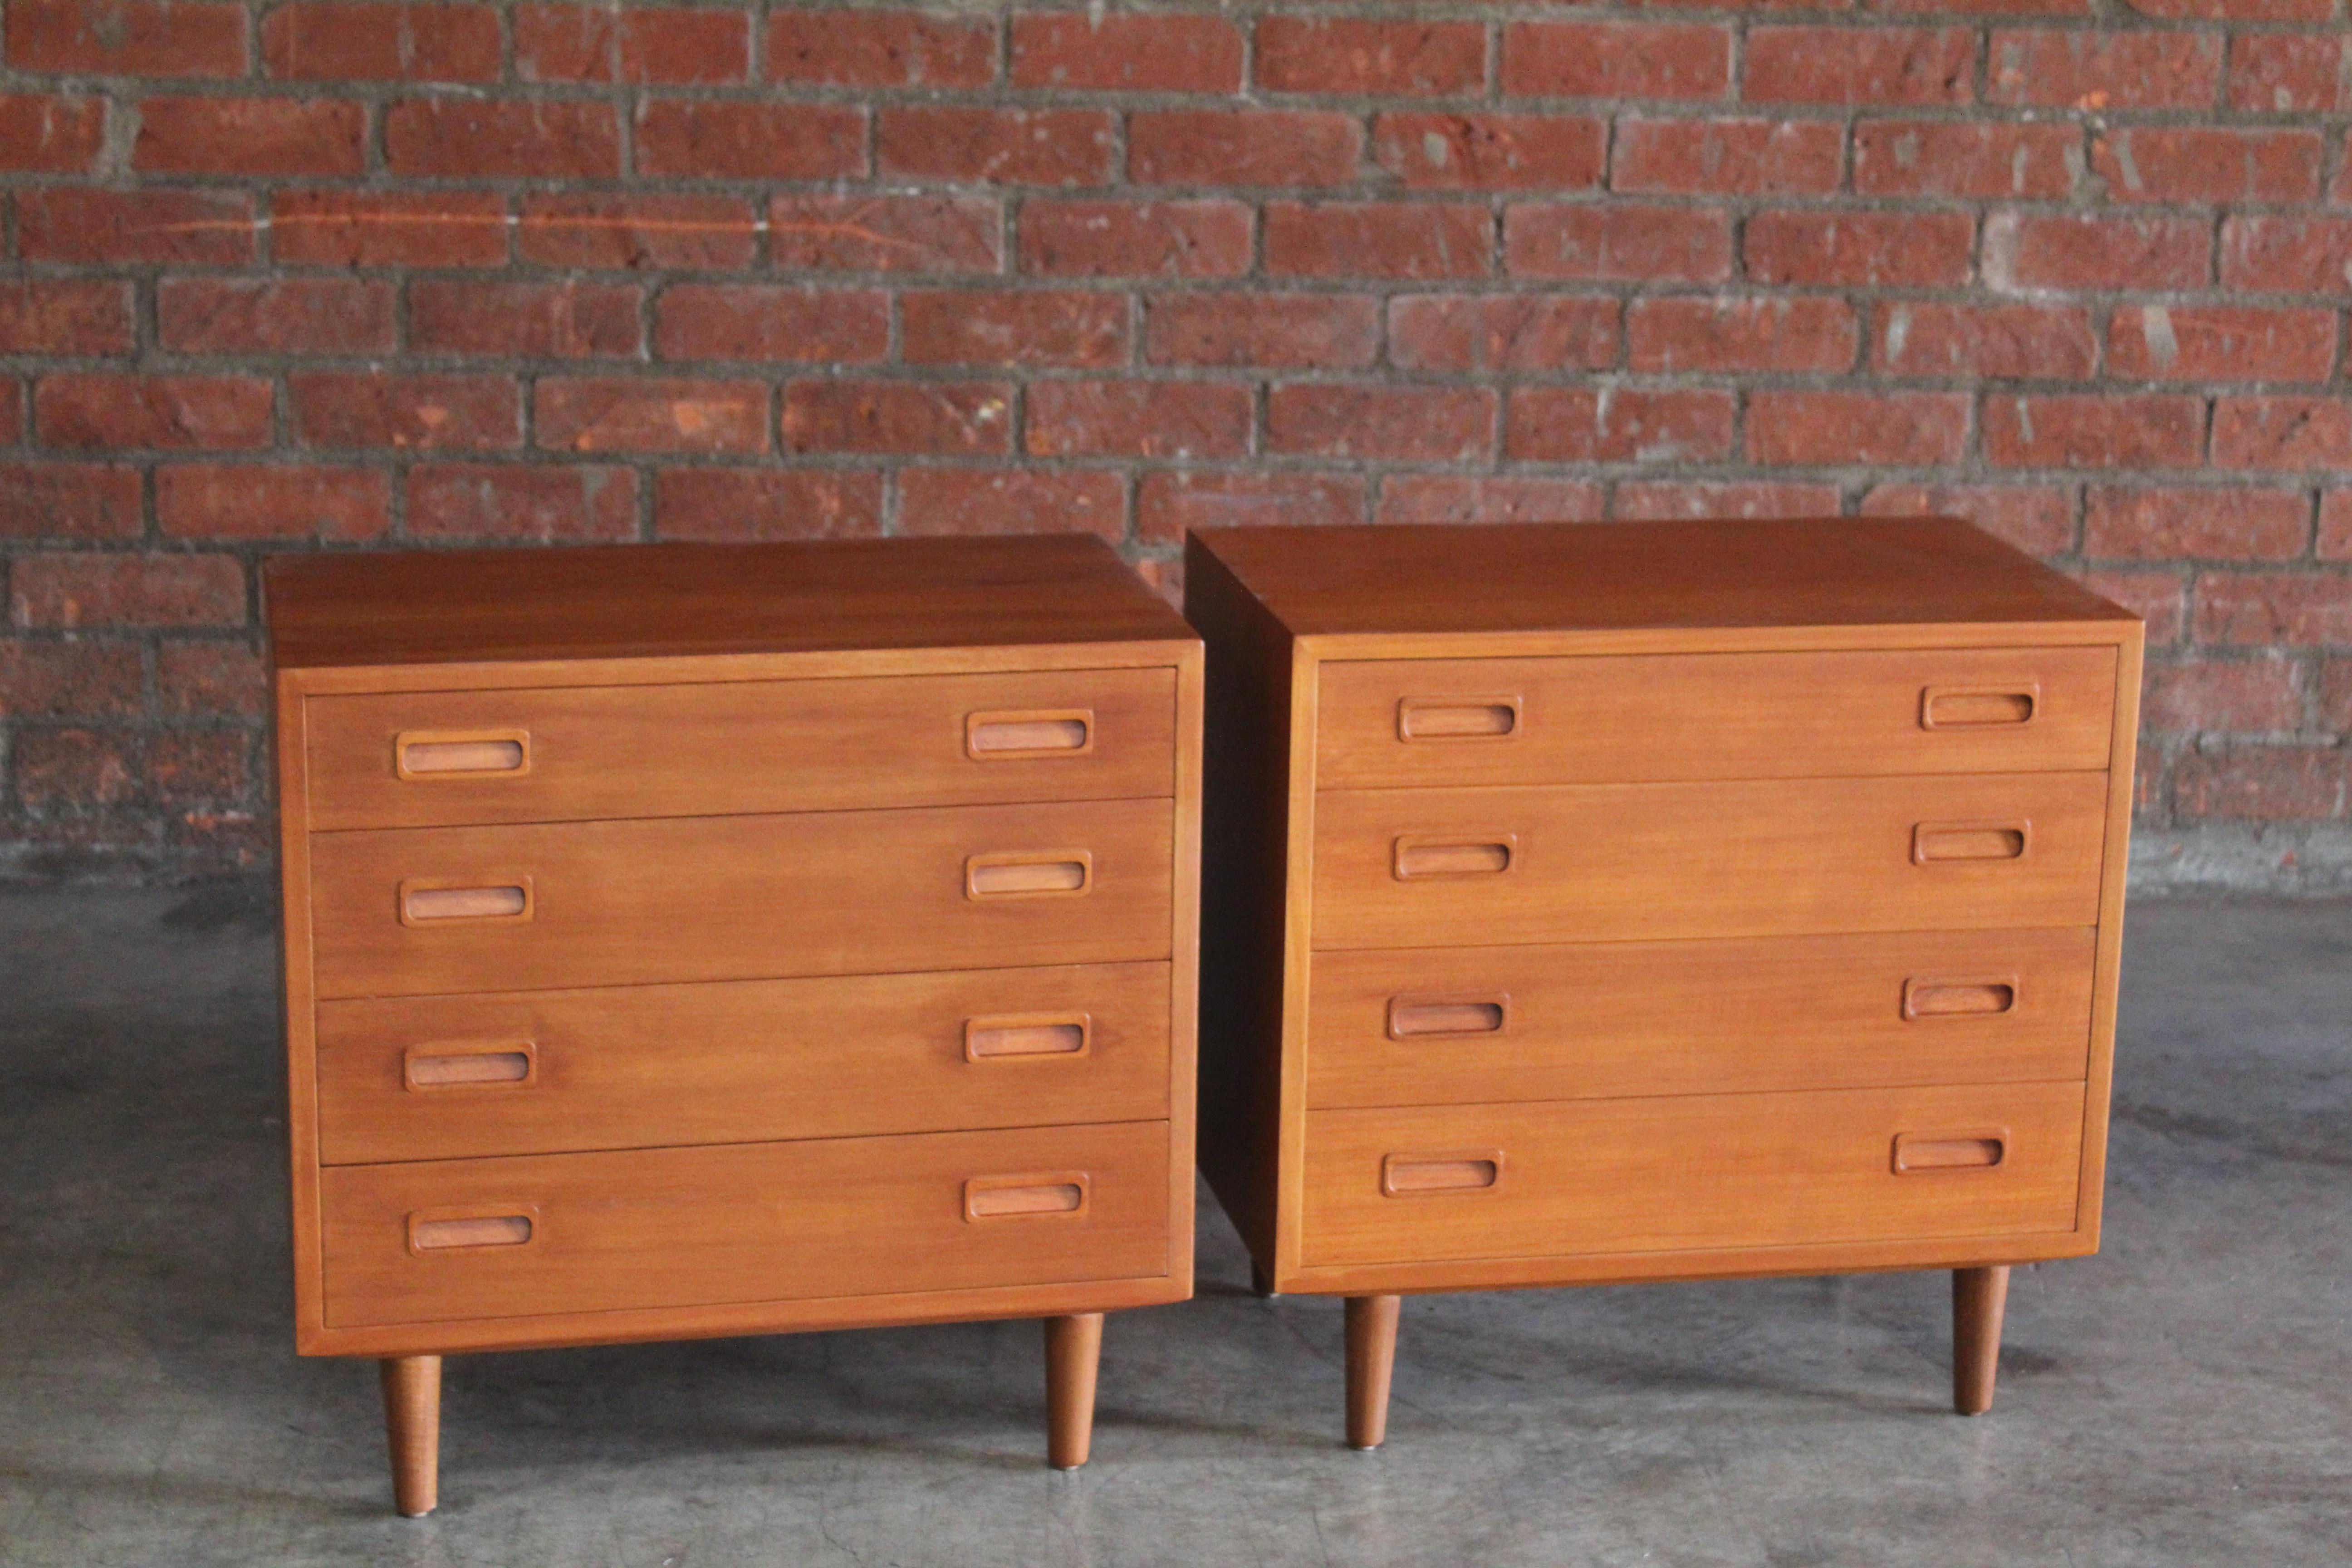 Mid-20th Century Pair of Teak Chests by Poul Hundevad, Denmark, 1960s